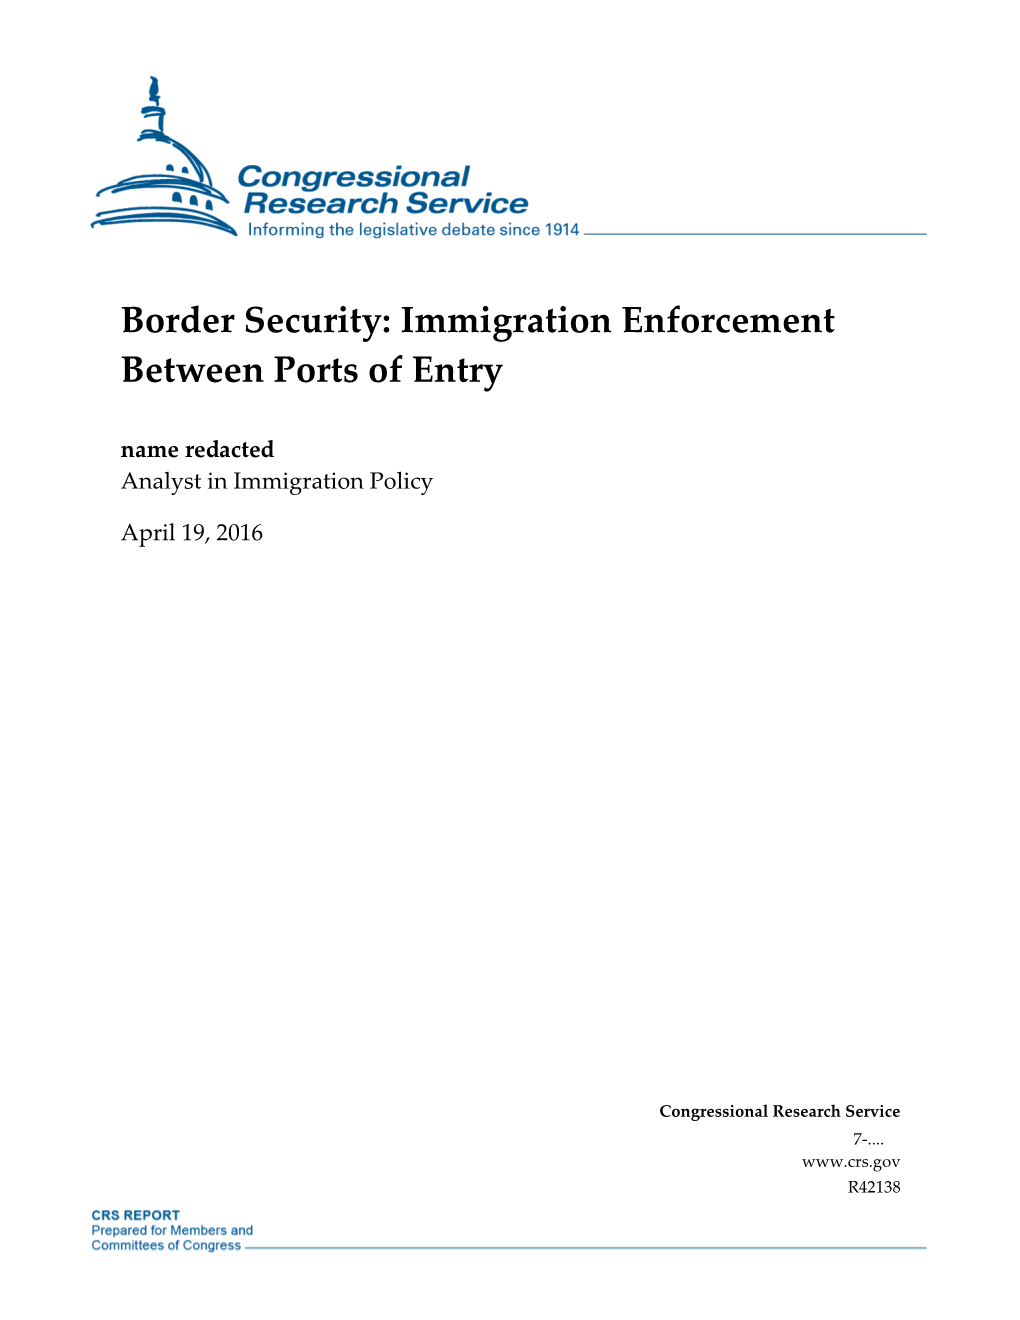 Border Security: Immigration Enforcement Between Ports of Entry Name Redacted Analyst in Immigration Policy